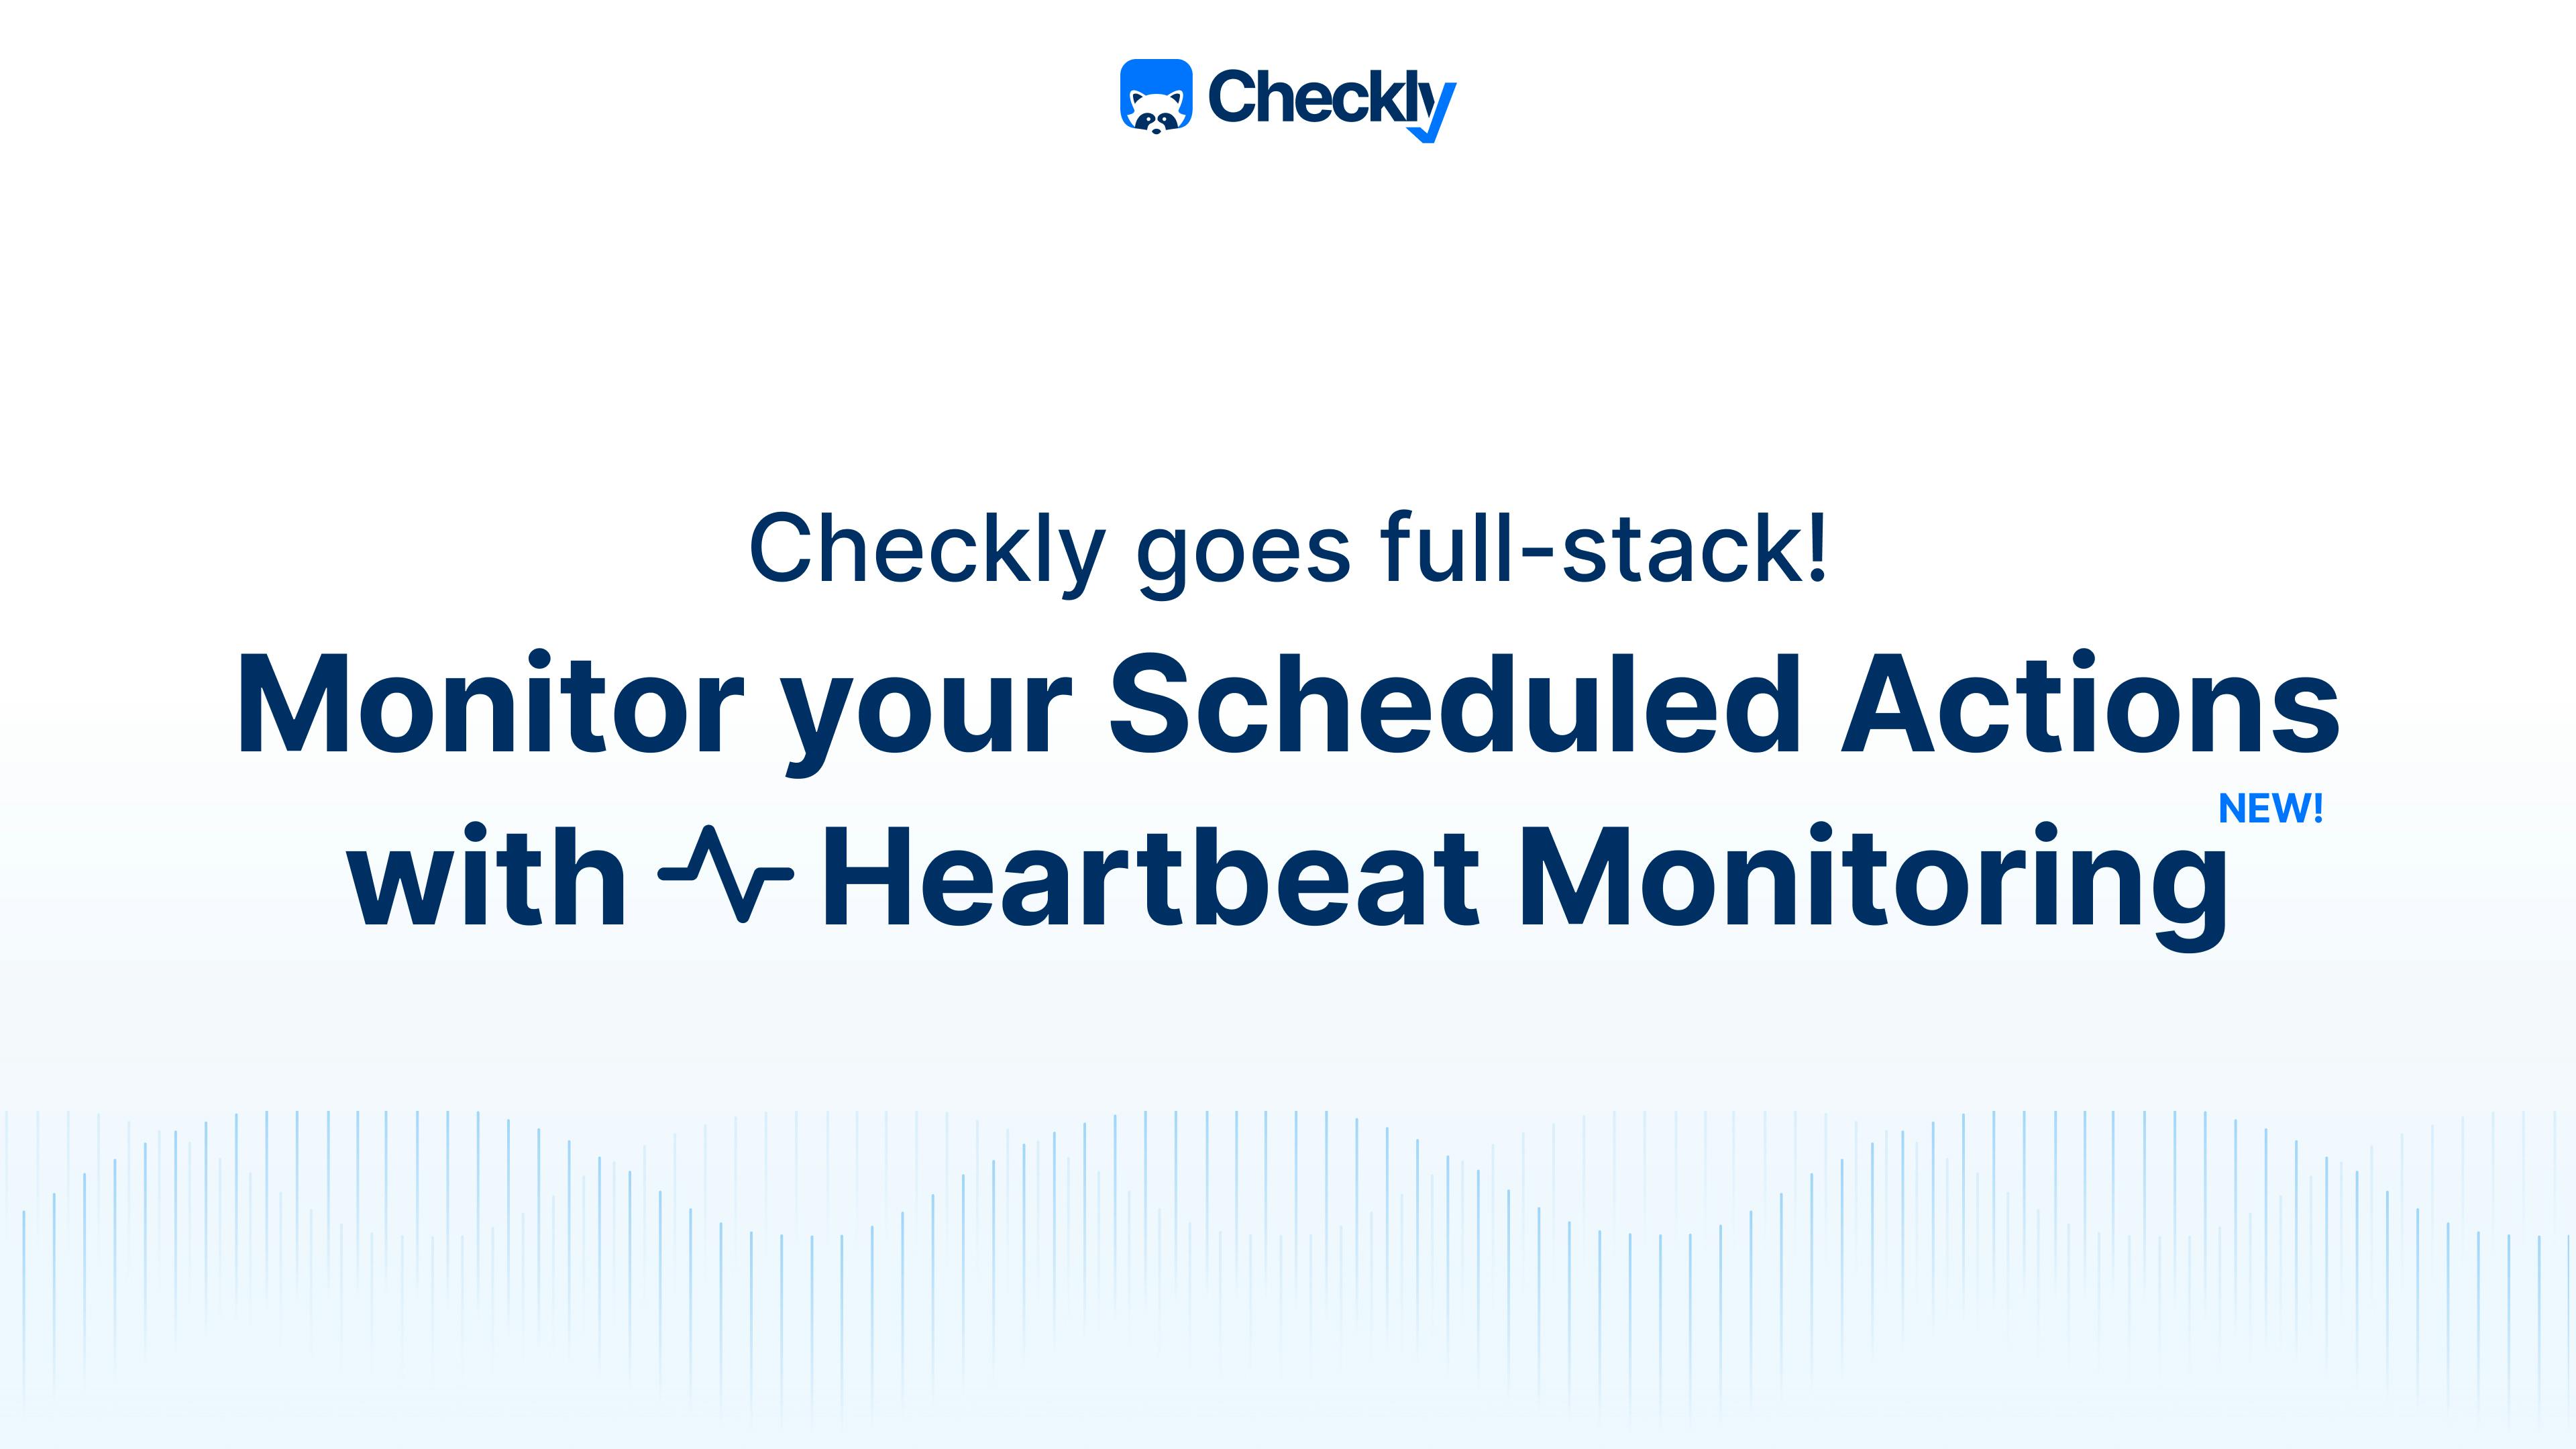 Monitor your scheduled actions with heartbeat monitoring